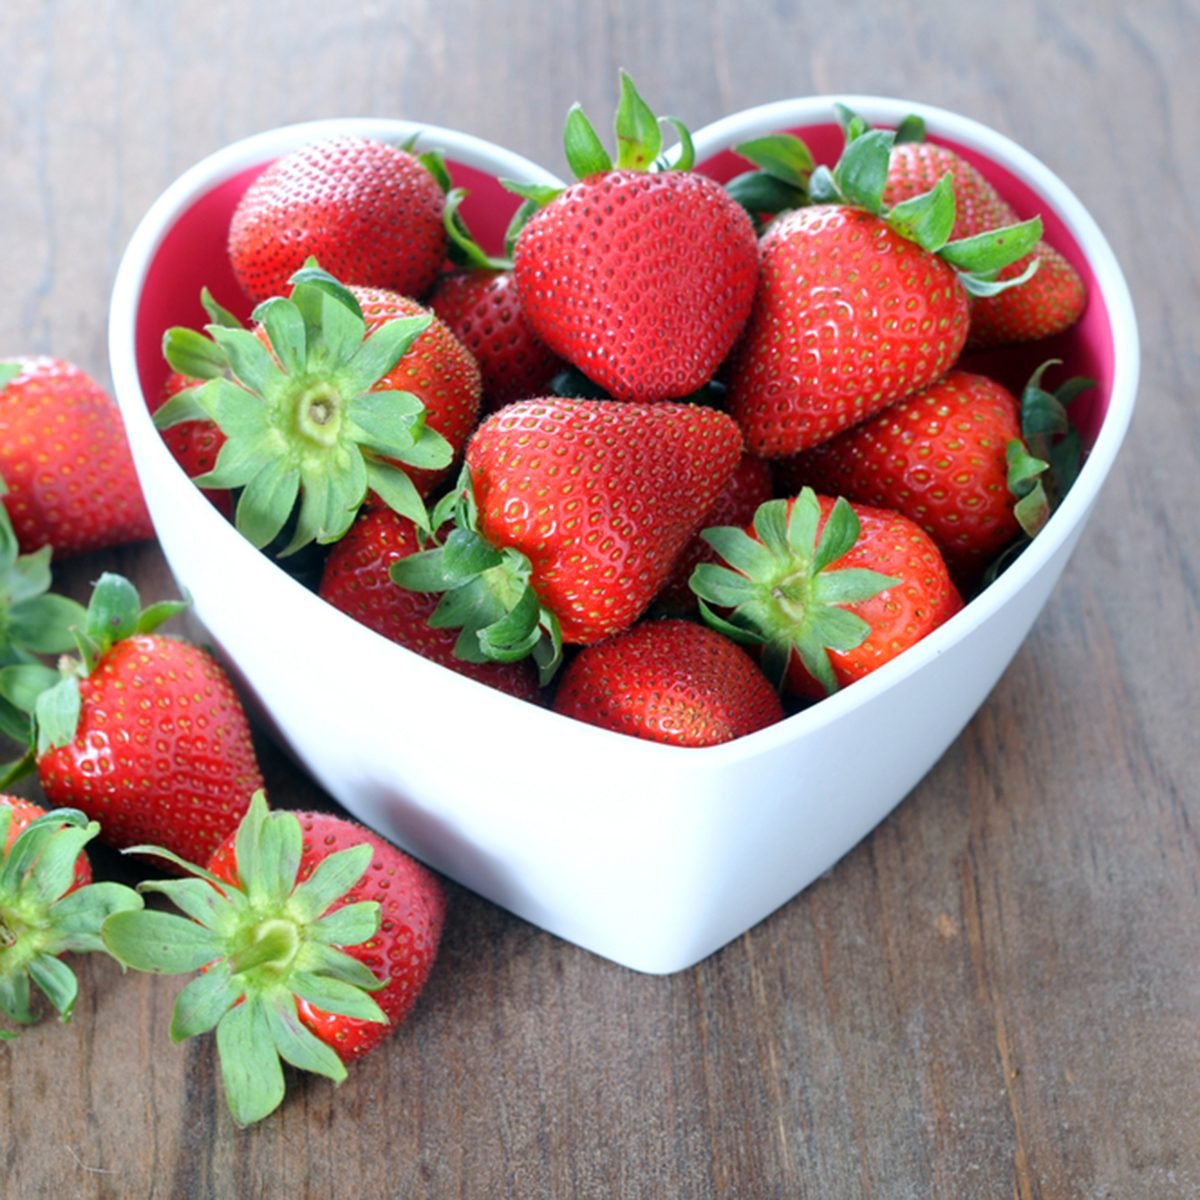 You Can Benefit From Strawberry Consumption